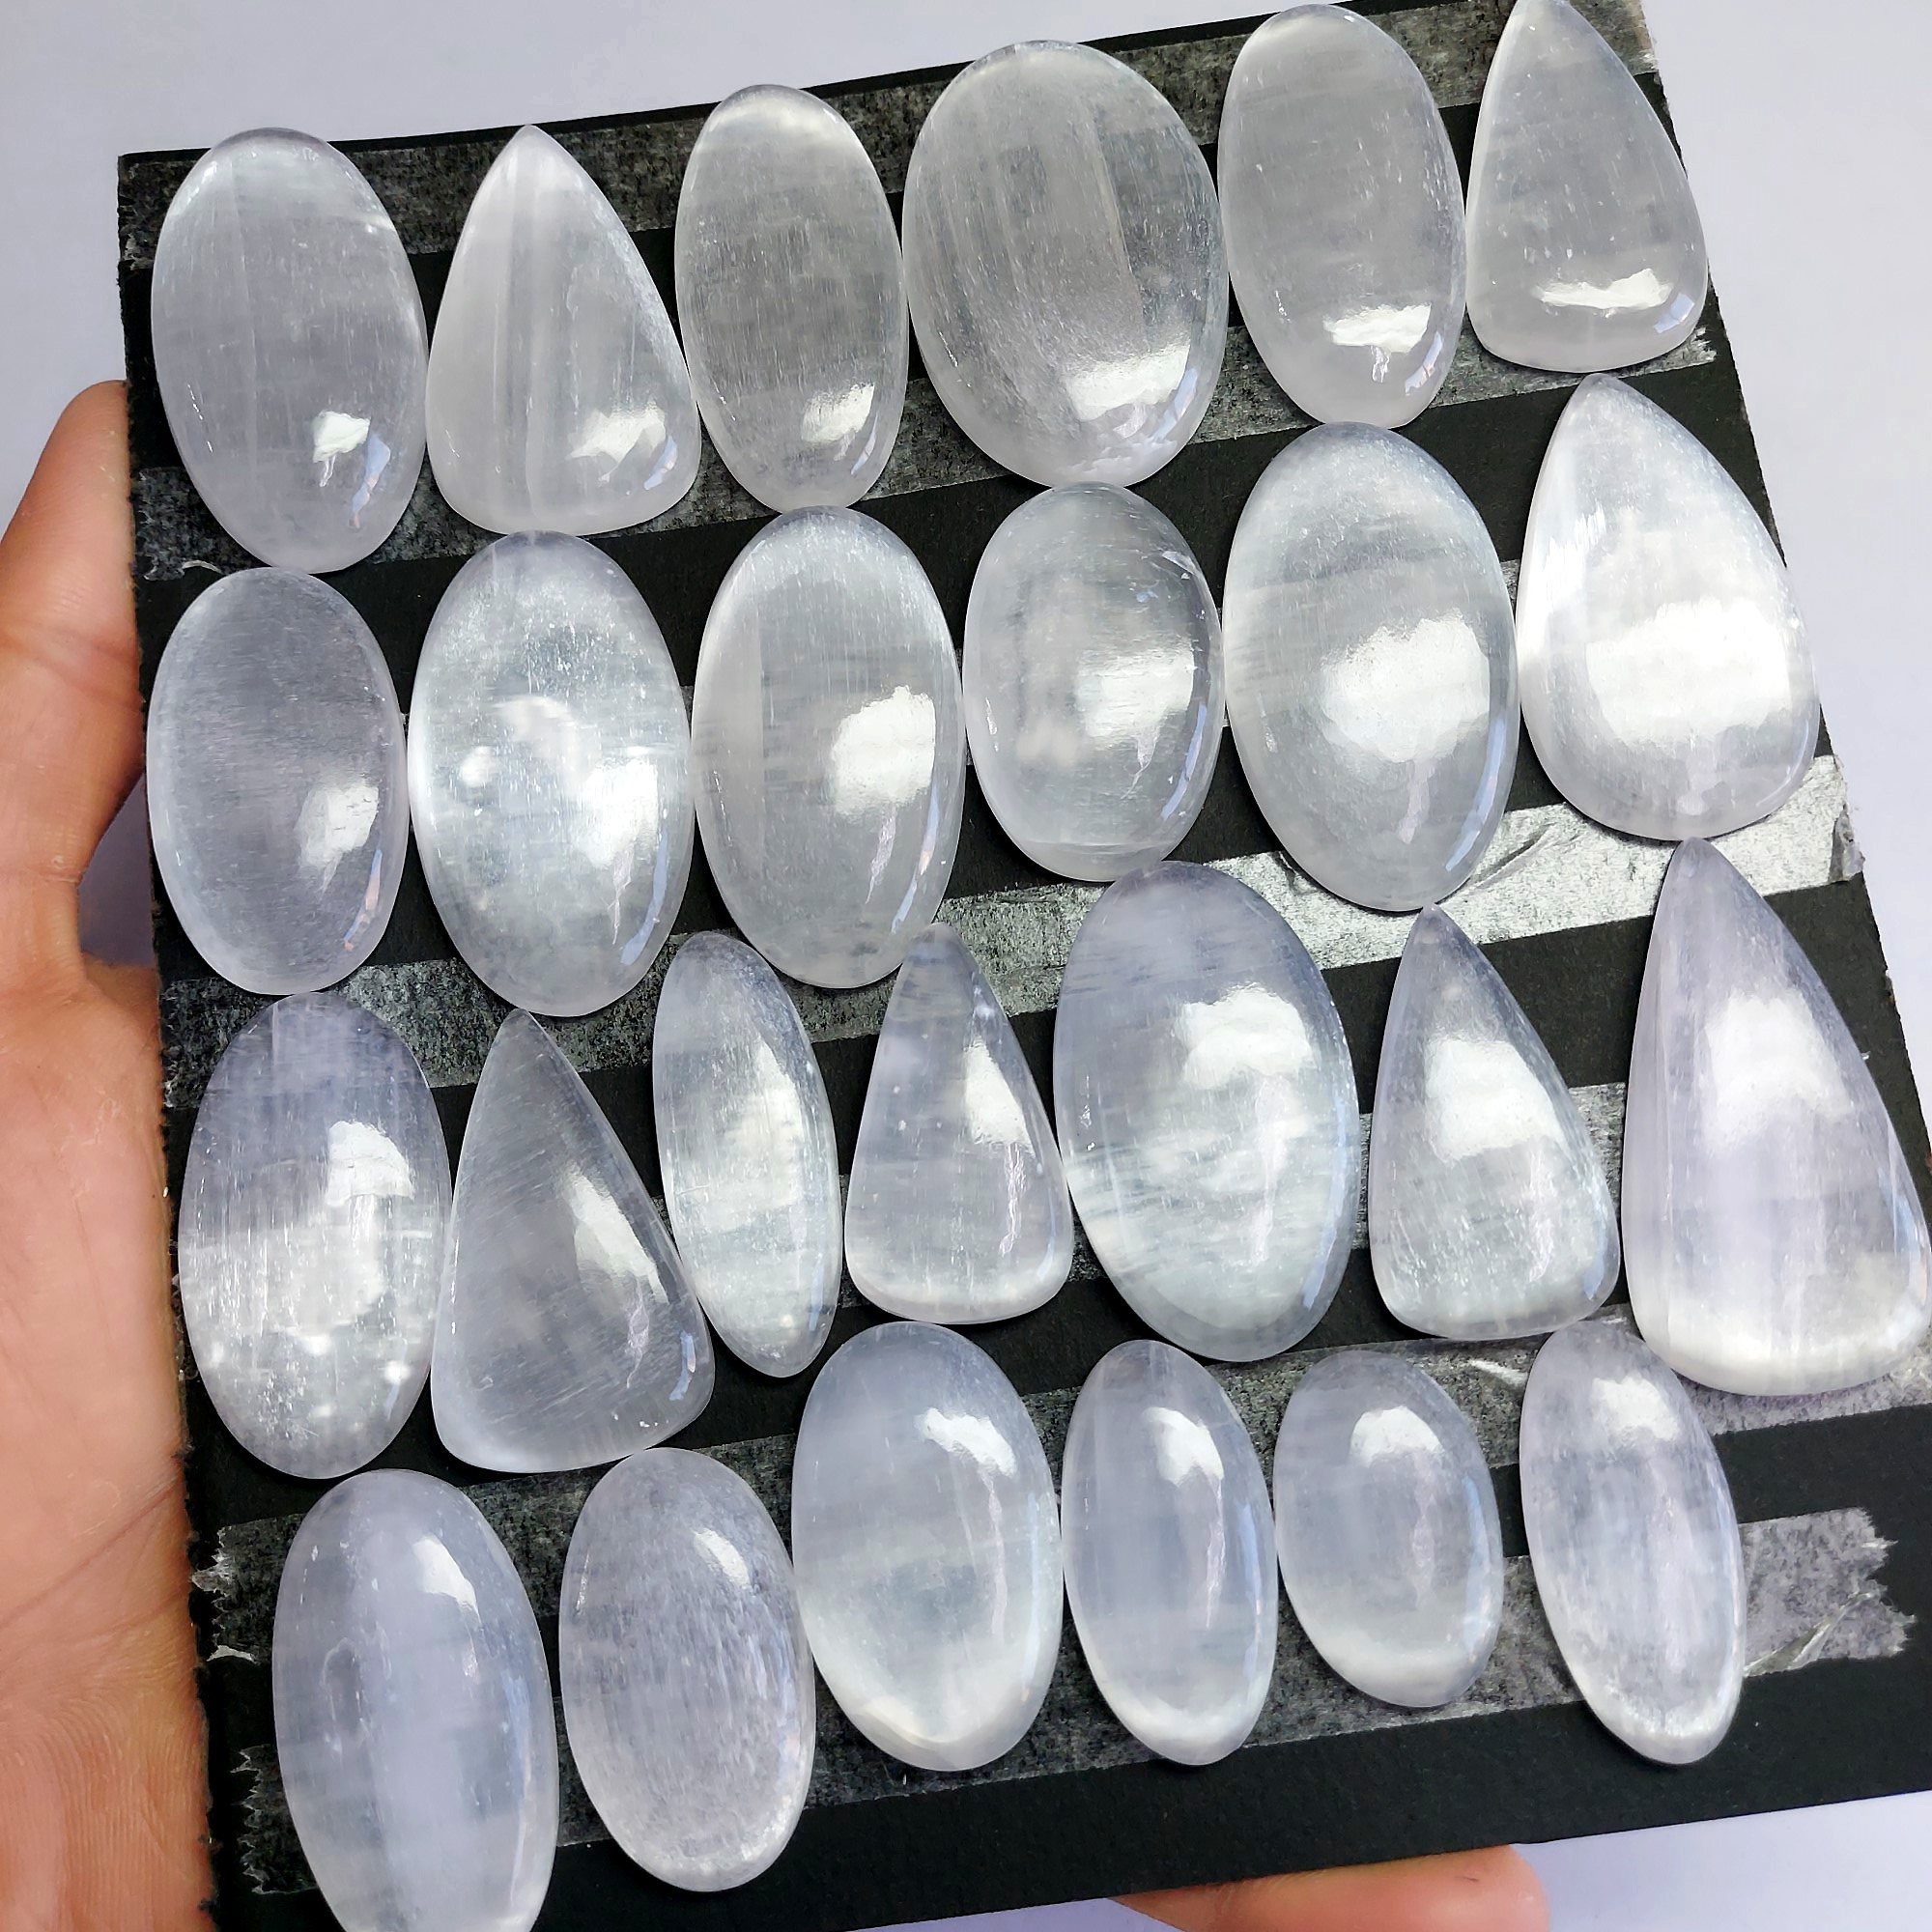 25pcs 1475 Cts Natural White Selenite Loose Cabochon Lot  Gemstone For Jewelry Wholesale Lot Size 48x30 28x17mm